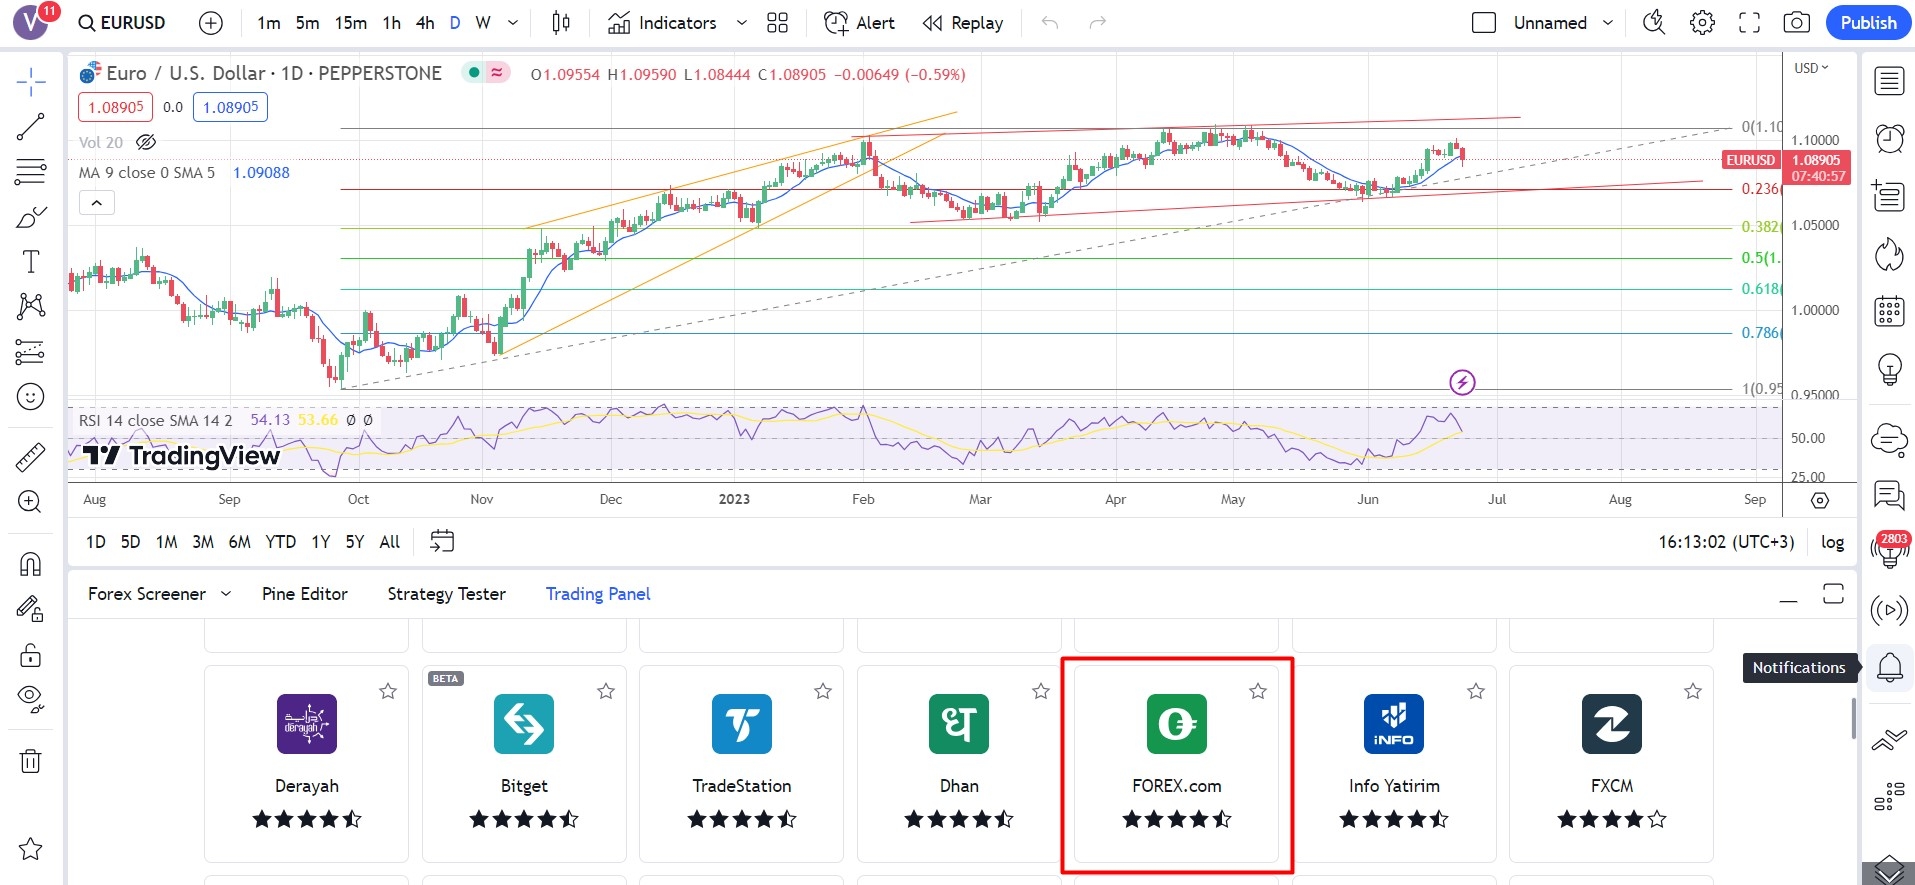 Selecting FOREX.com on the TradingView trading panel